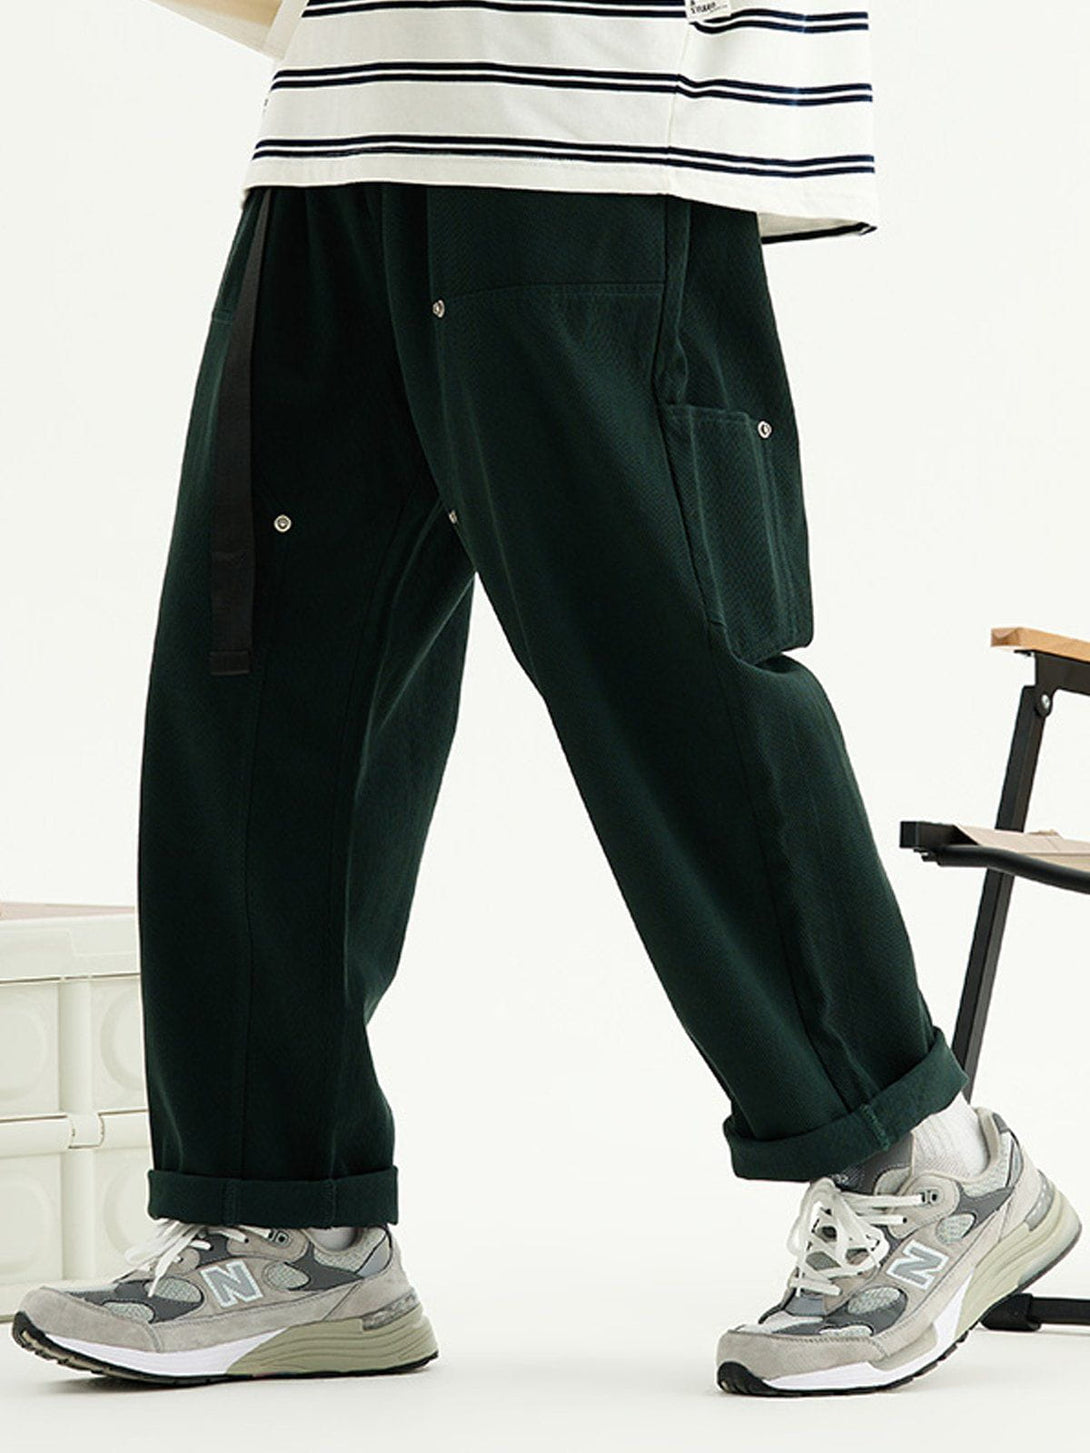 Majesda® - Solid Color Straps Cargo Pants outfit ideas streetwear fashion